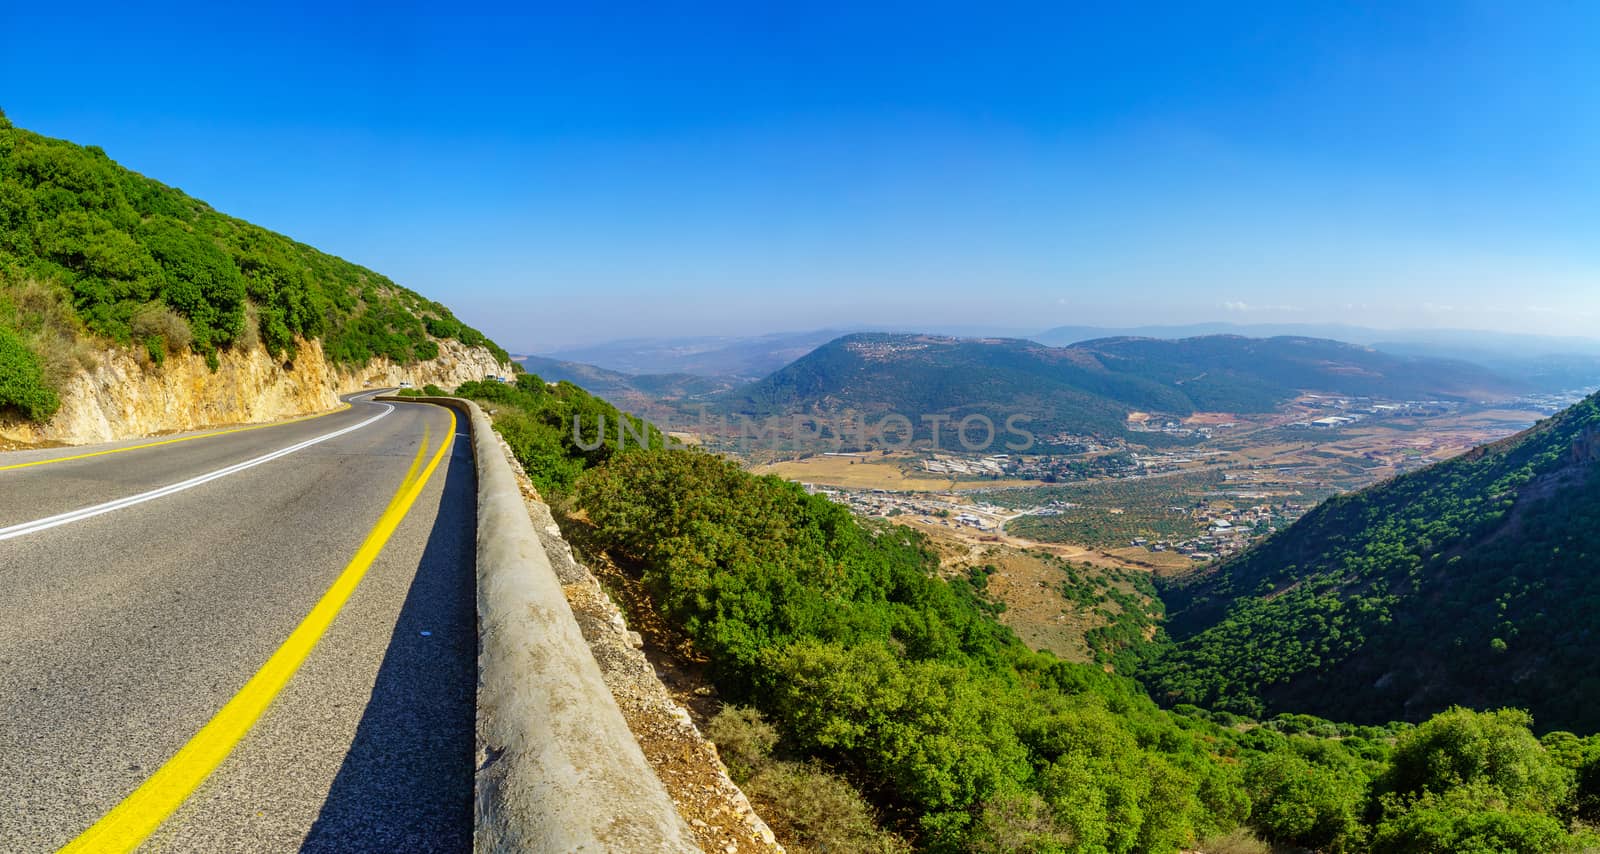 View of road and landscape in the upper galilee, northern Israel